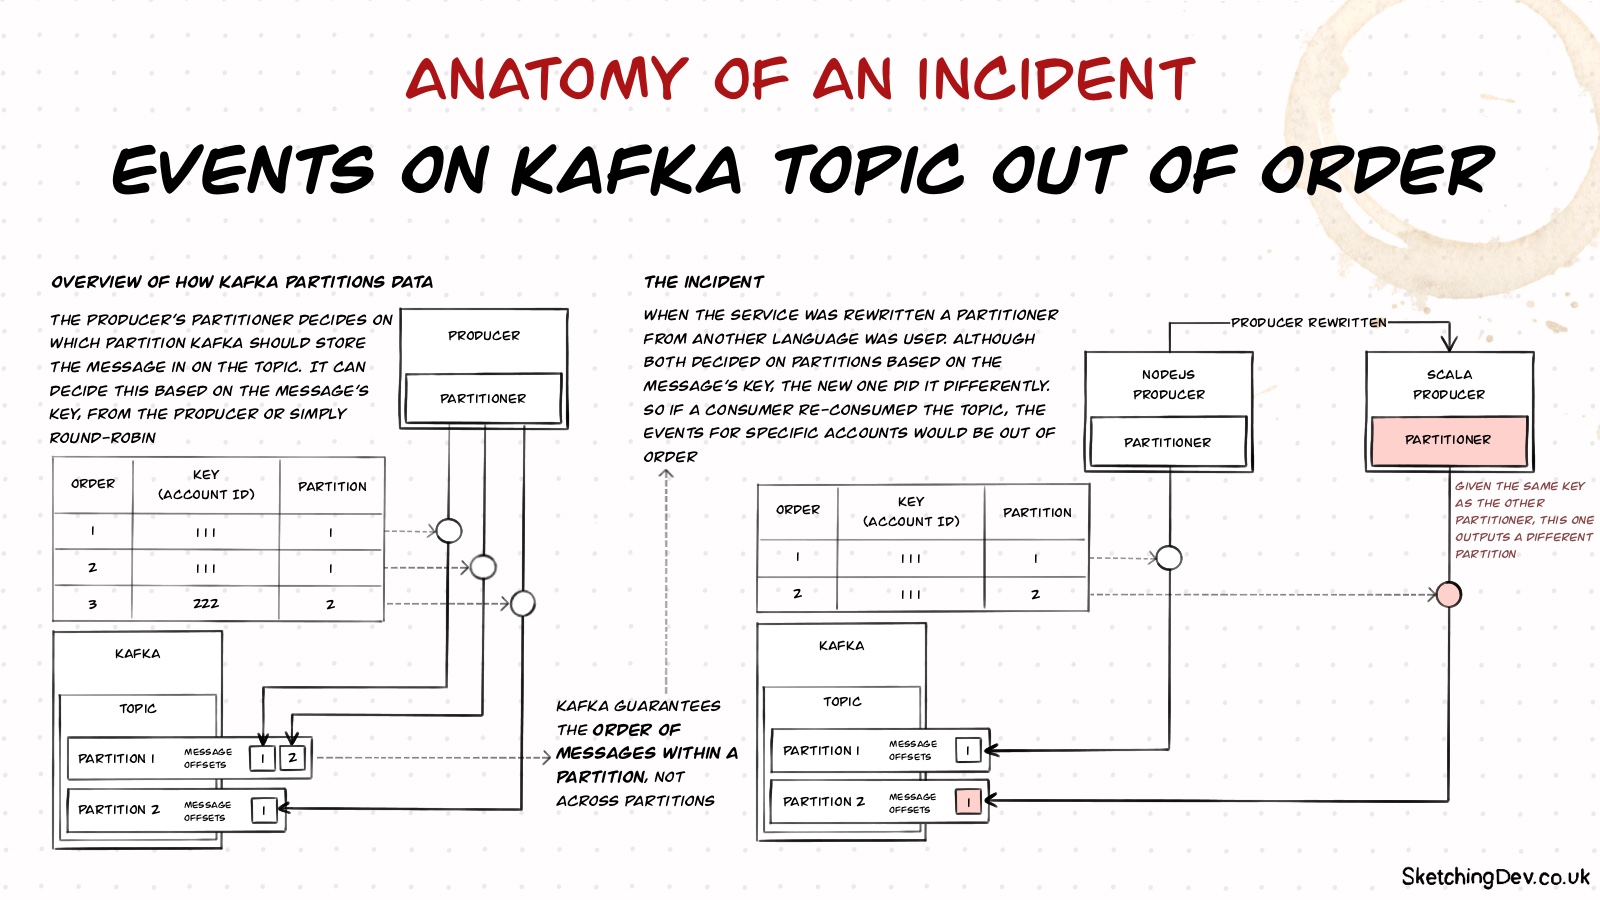 Anatomy of an Incident: Events on Kafka topic out of order